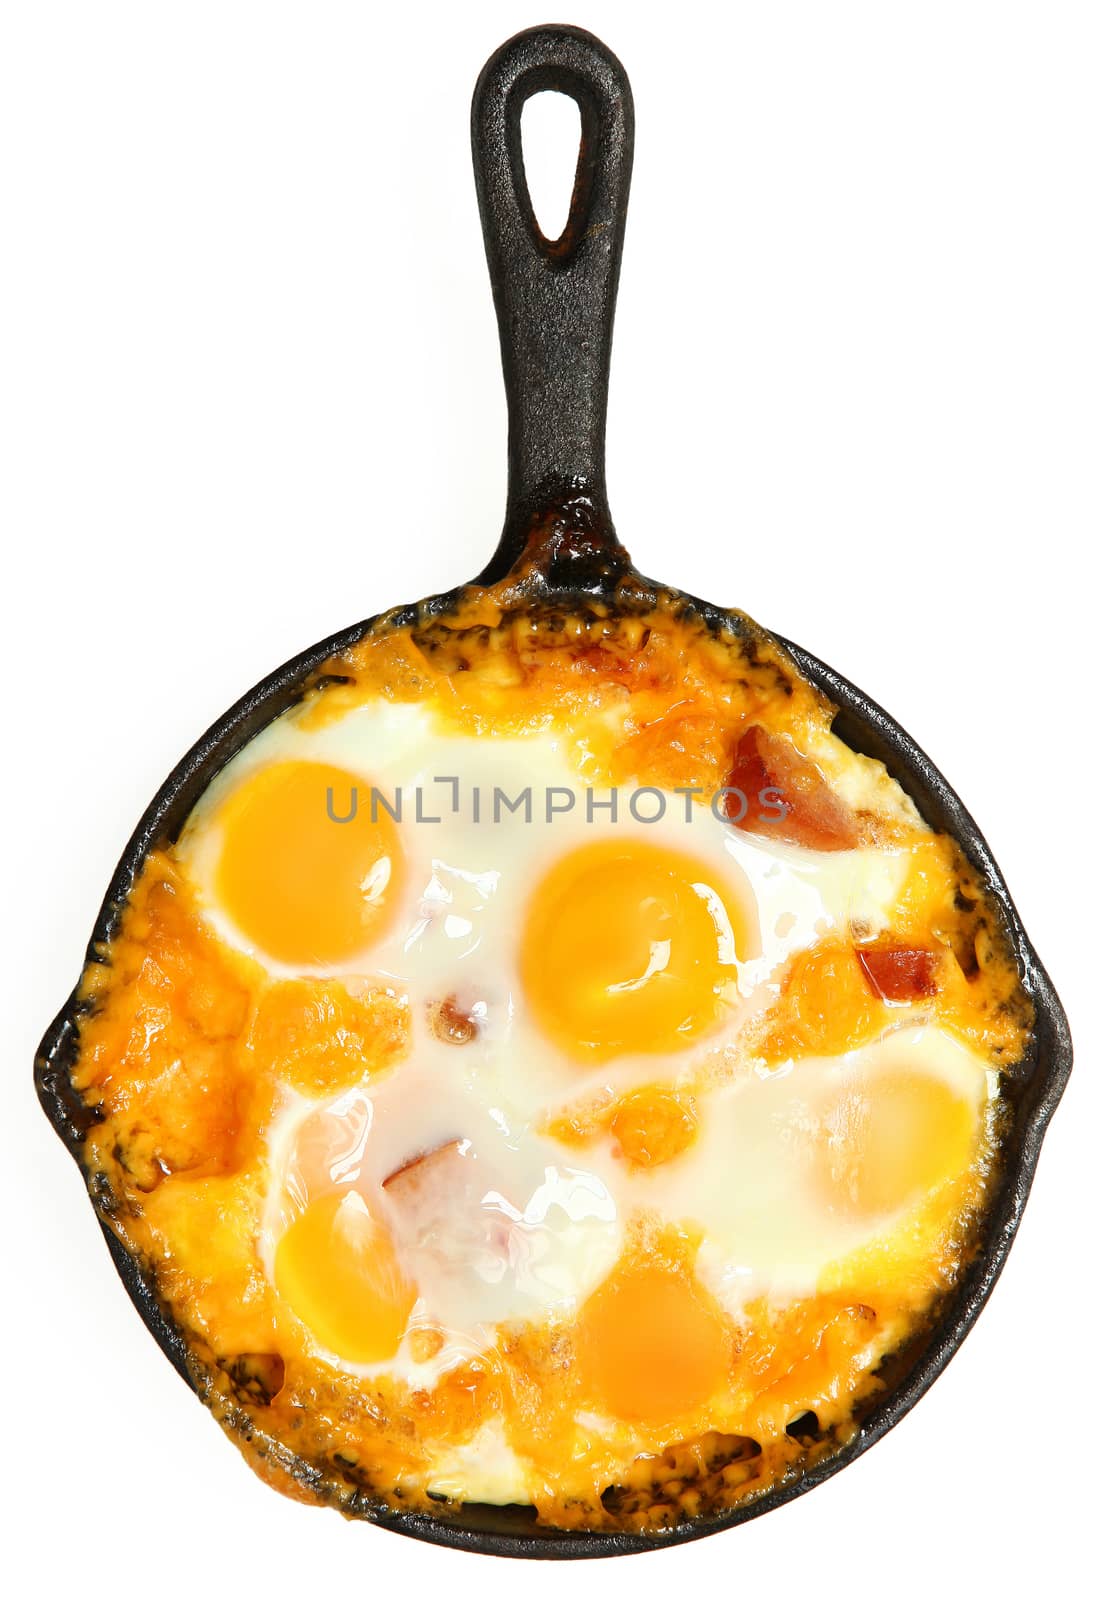 Fresh Oven Baked Eggs with Sausage and Cheddar Cheese over White